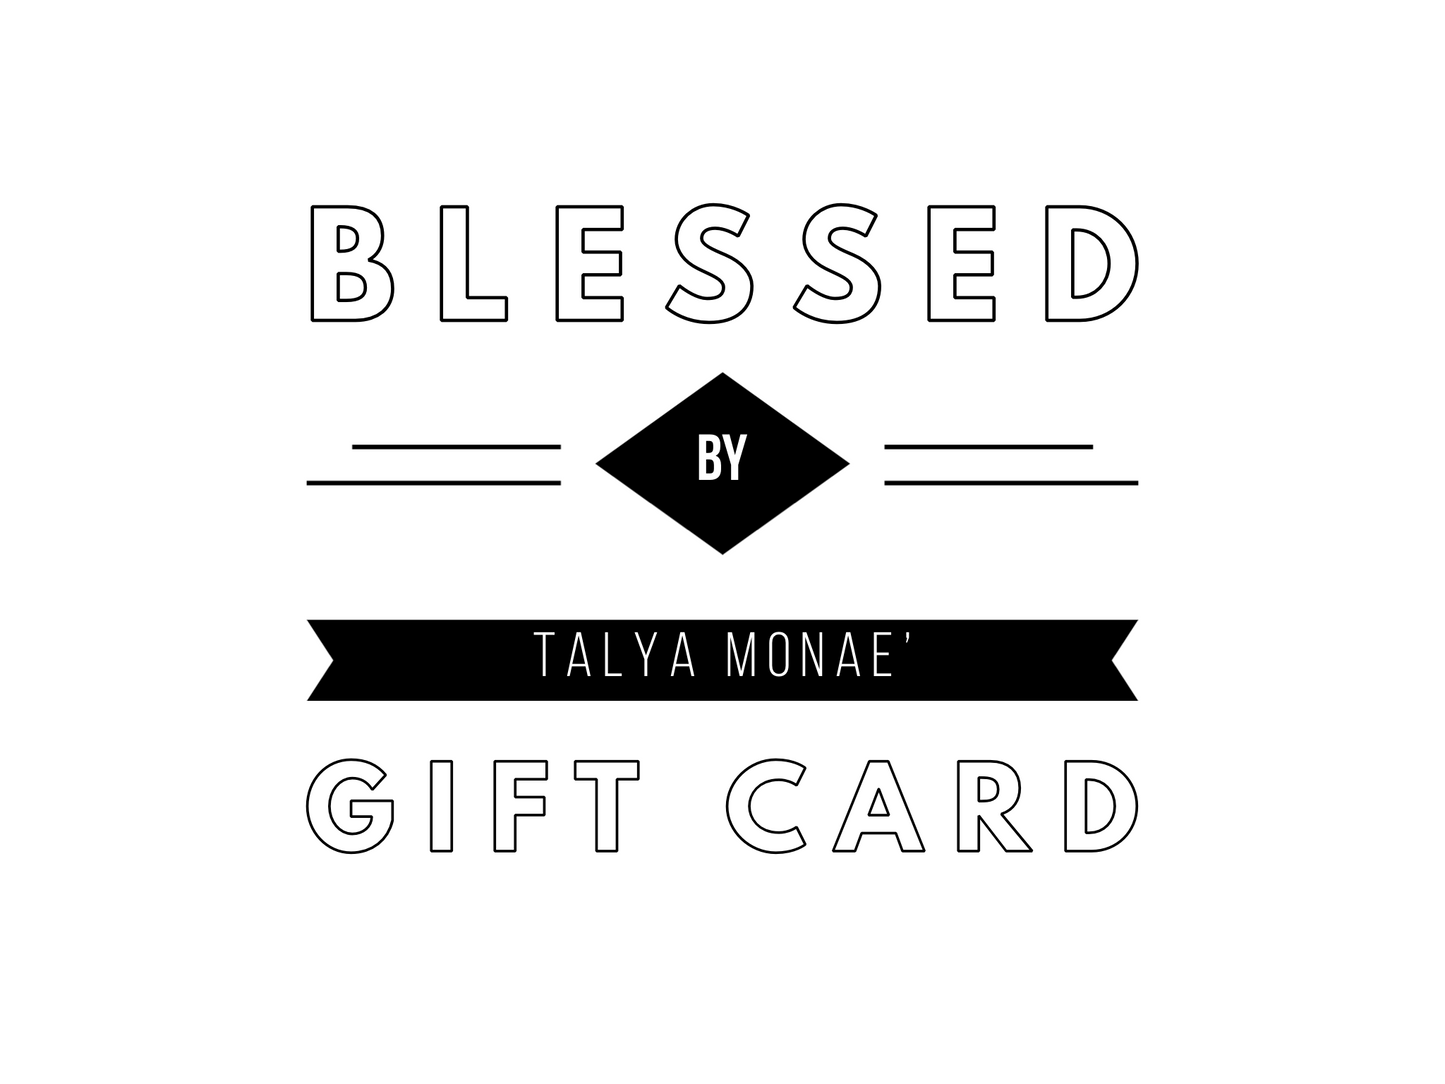 Blessed by Talya Monae gift card